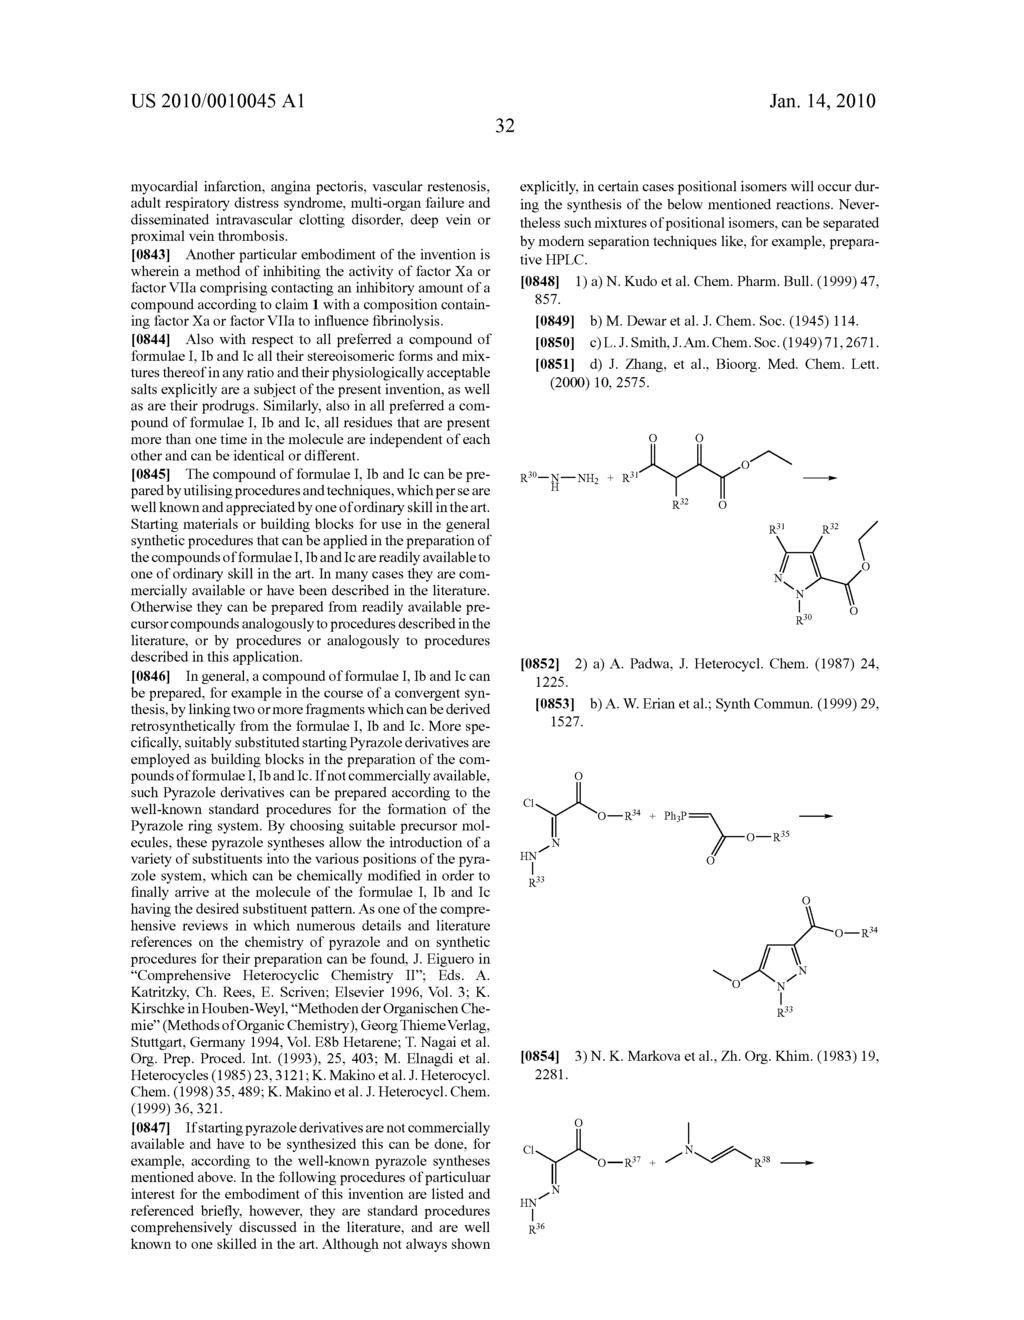 PYRAZOLE-DERIVATIVES AS FACTOR Xa INHIBITORS - diagram, schematic, and image 33